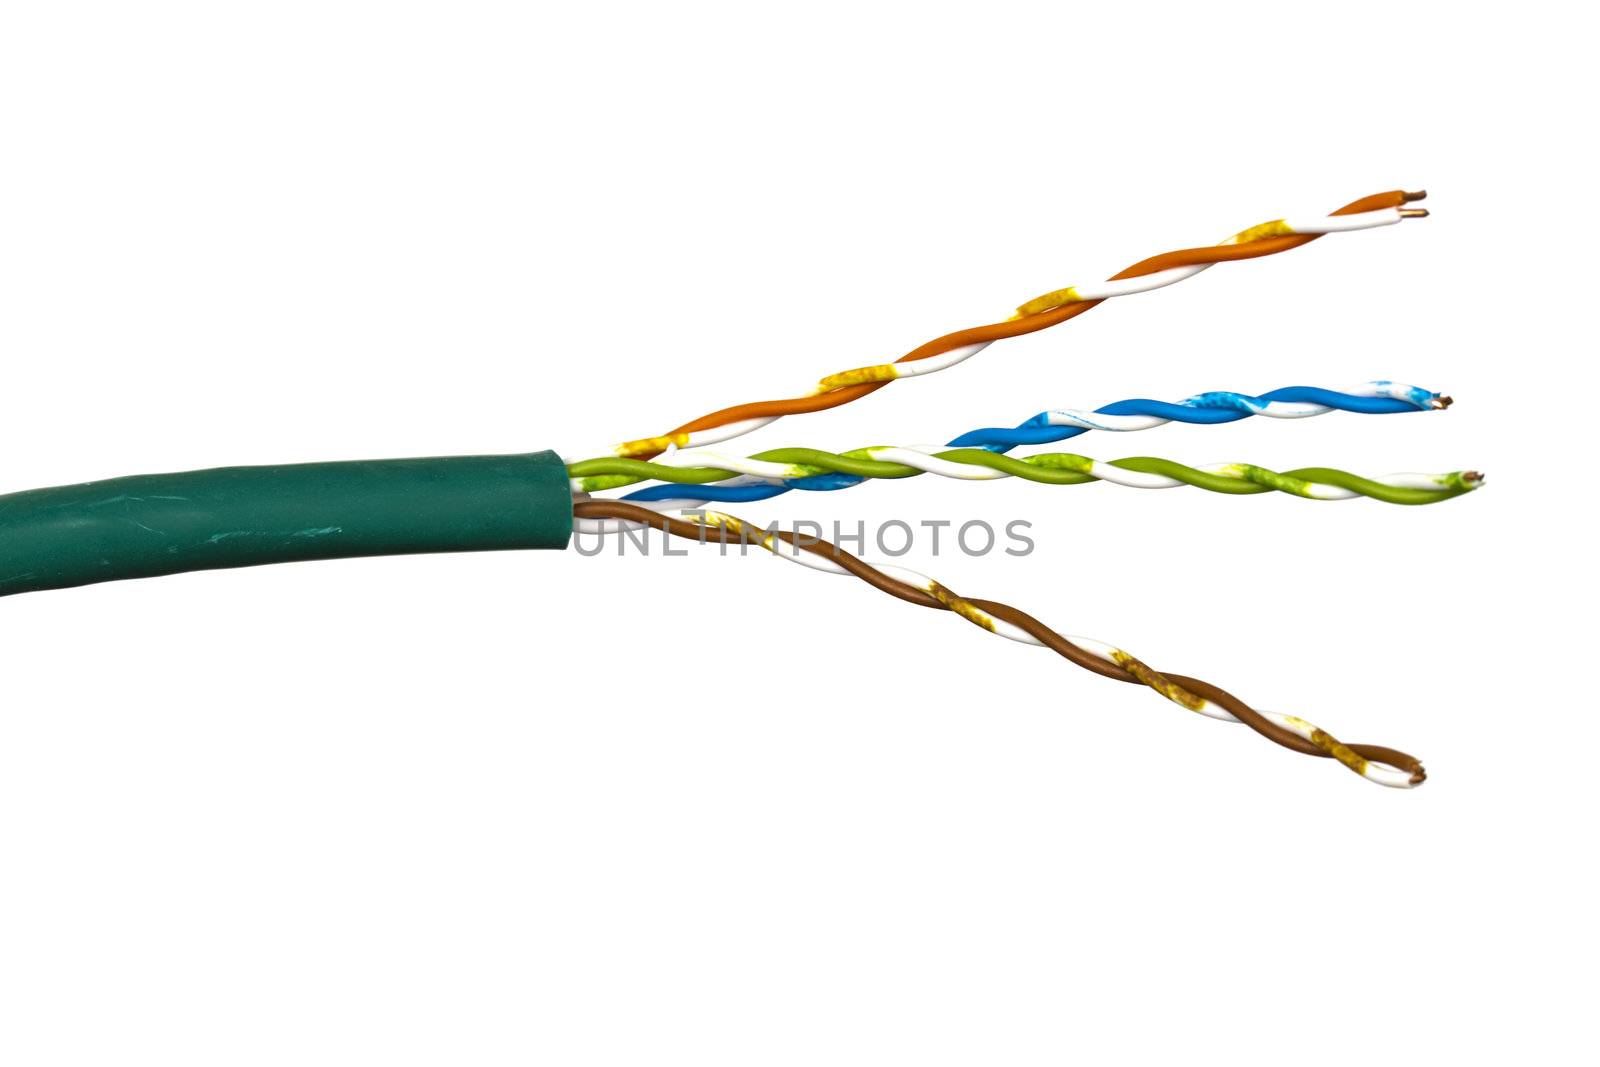 Close up of an electrical wire by ibphoto